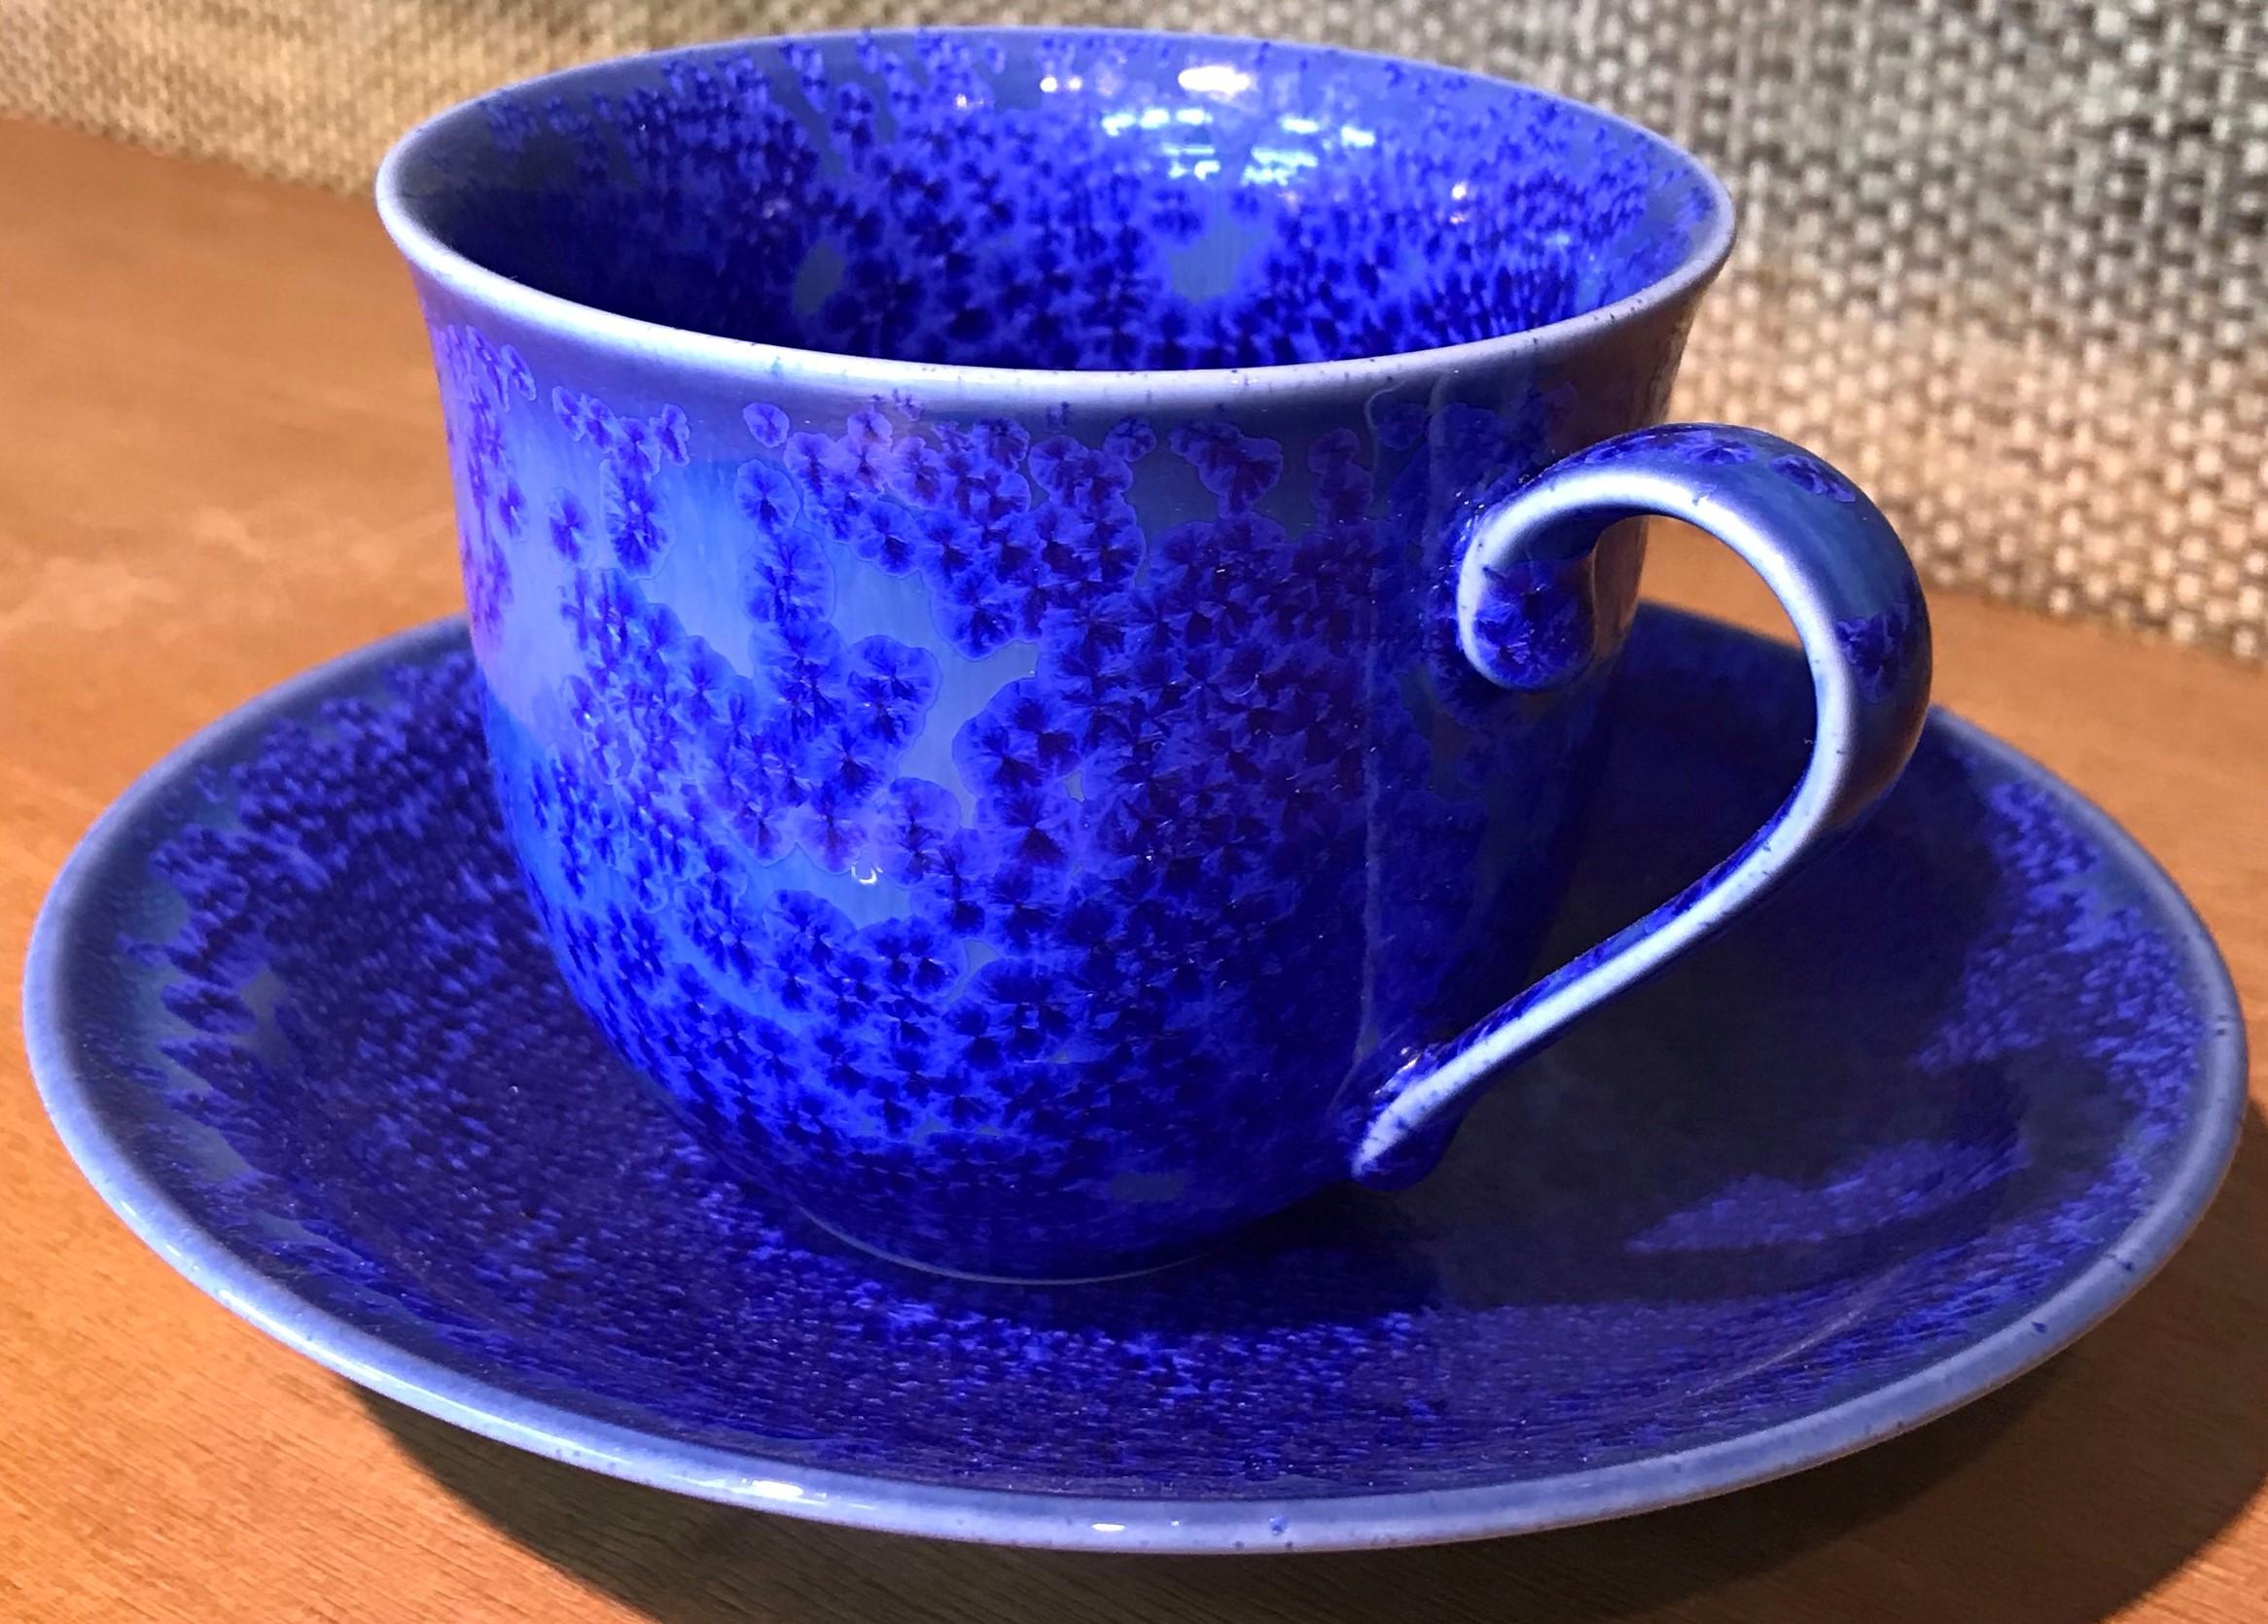 Exceptional Japanese contemporary porcelain cup and saucer, hand-glazed in a stunning vivid royal blue on a beautifully shaped body. This is a signed work by a highly acclaimed award-winning master porcelain artist from the Imari-Arita region of